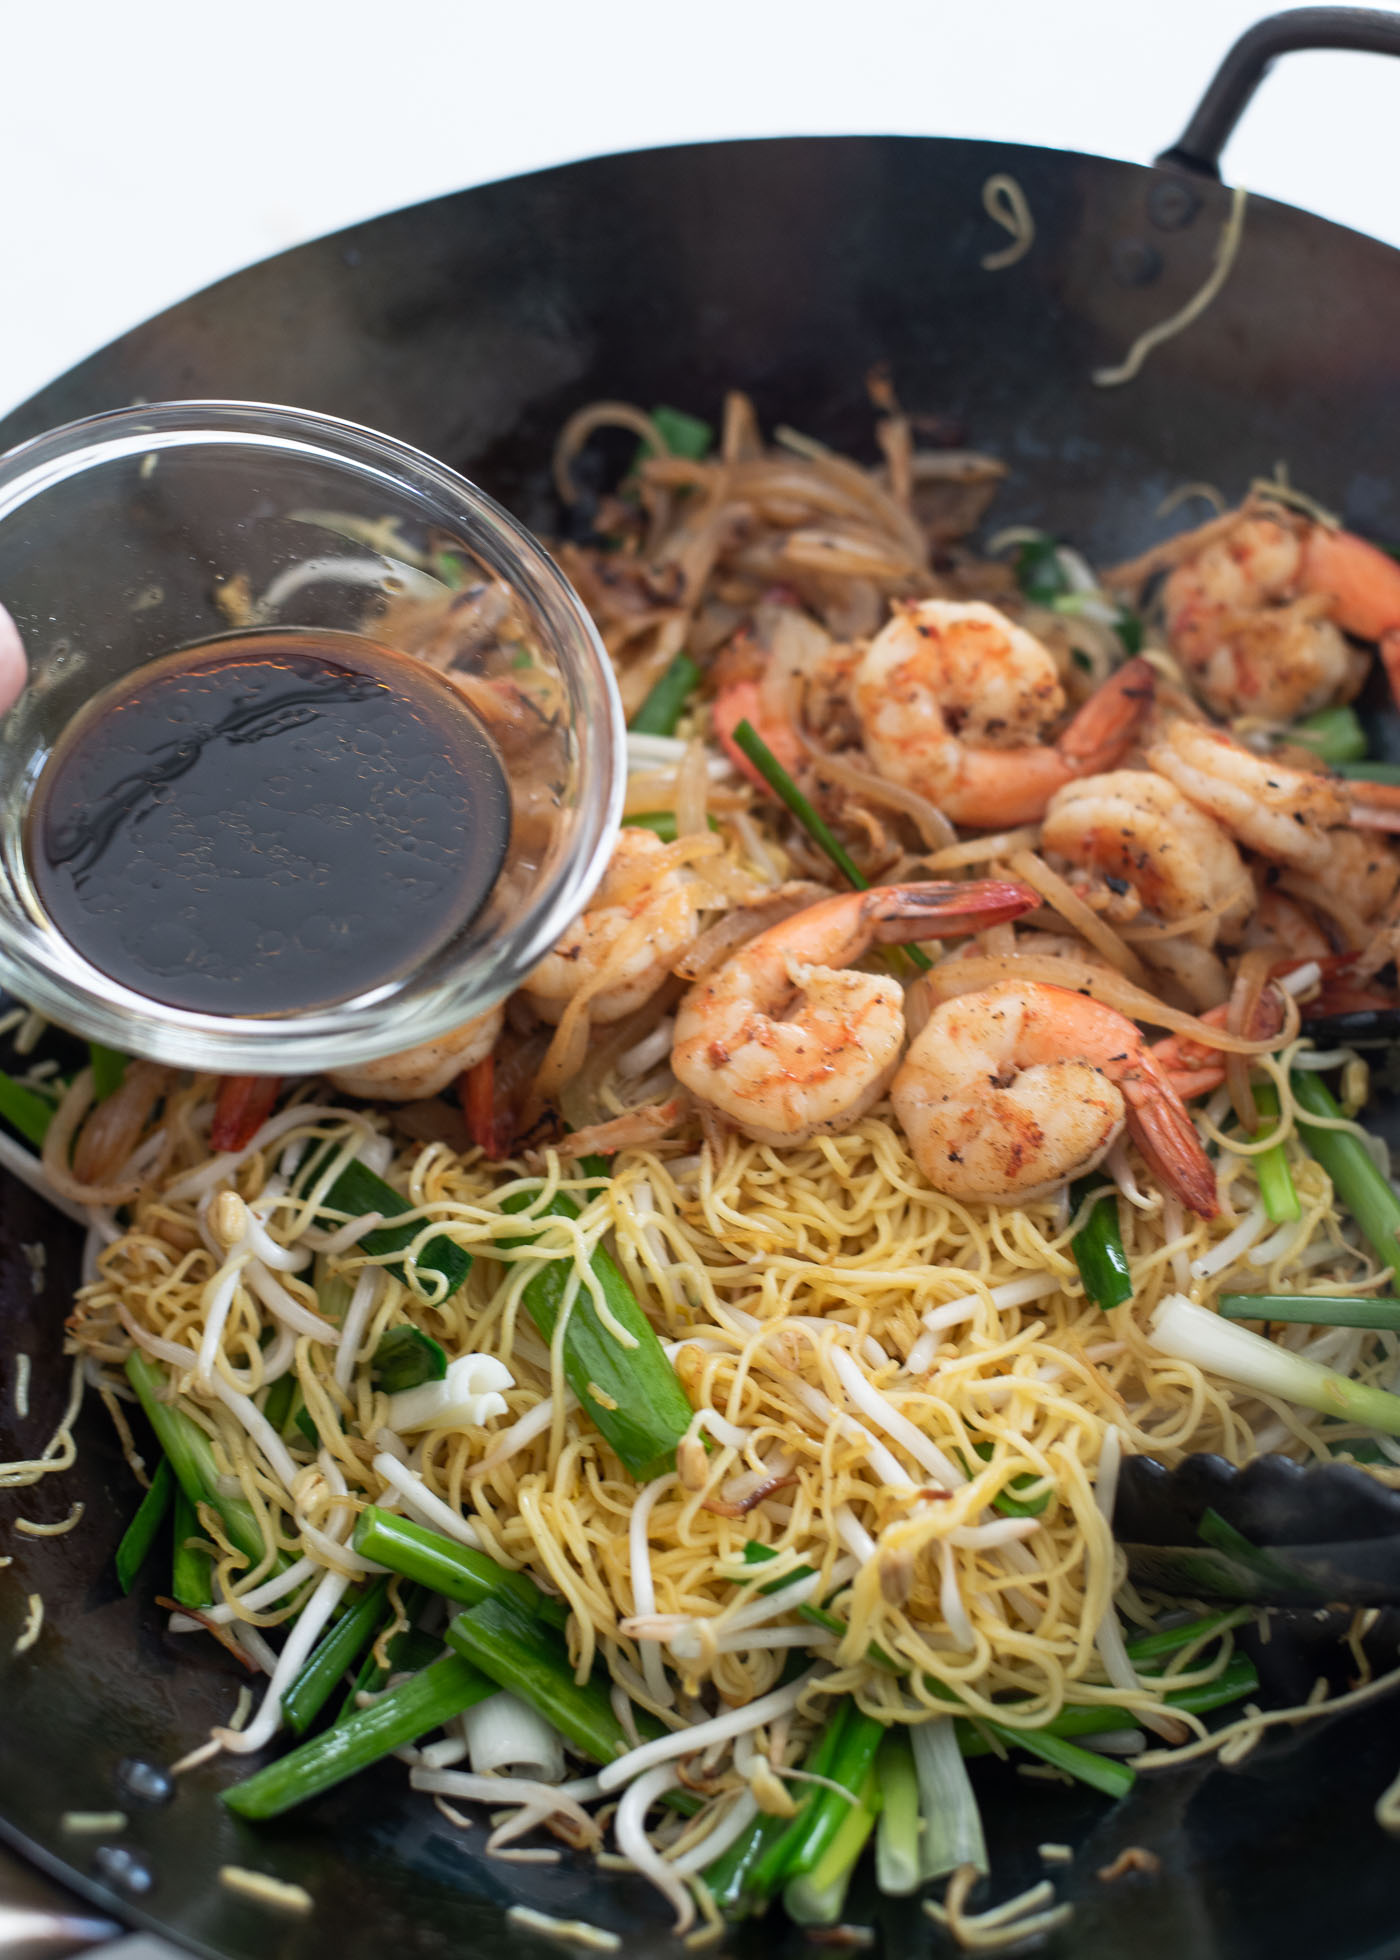 Pan-fried noodle sauce being poured on Hong Kong noodles, shrimp and vegetables in a wok.